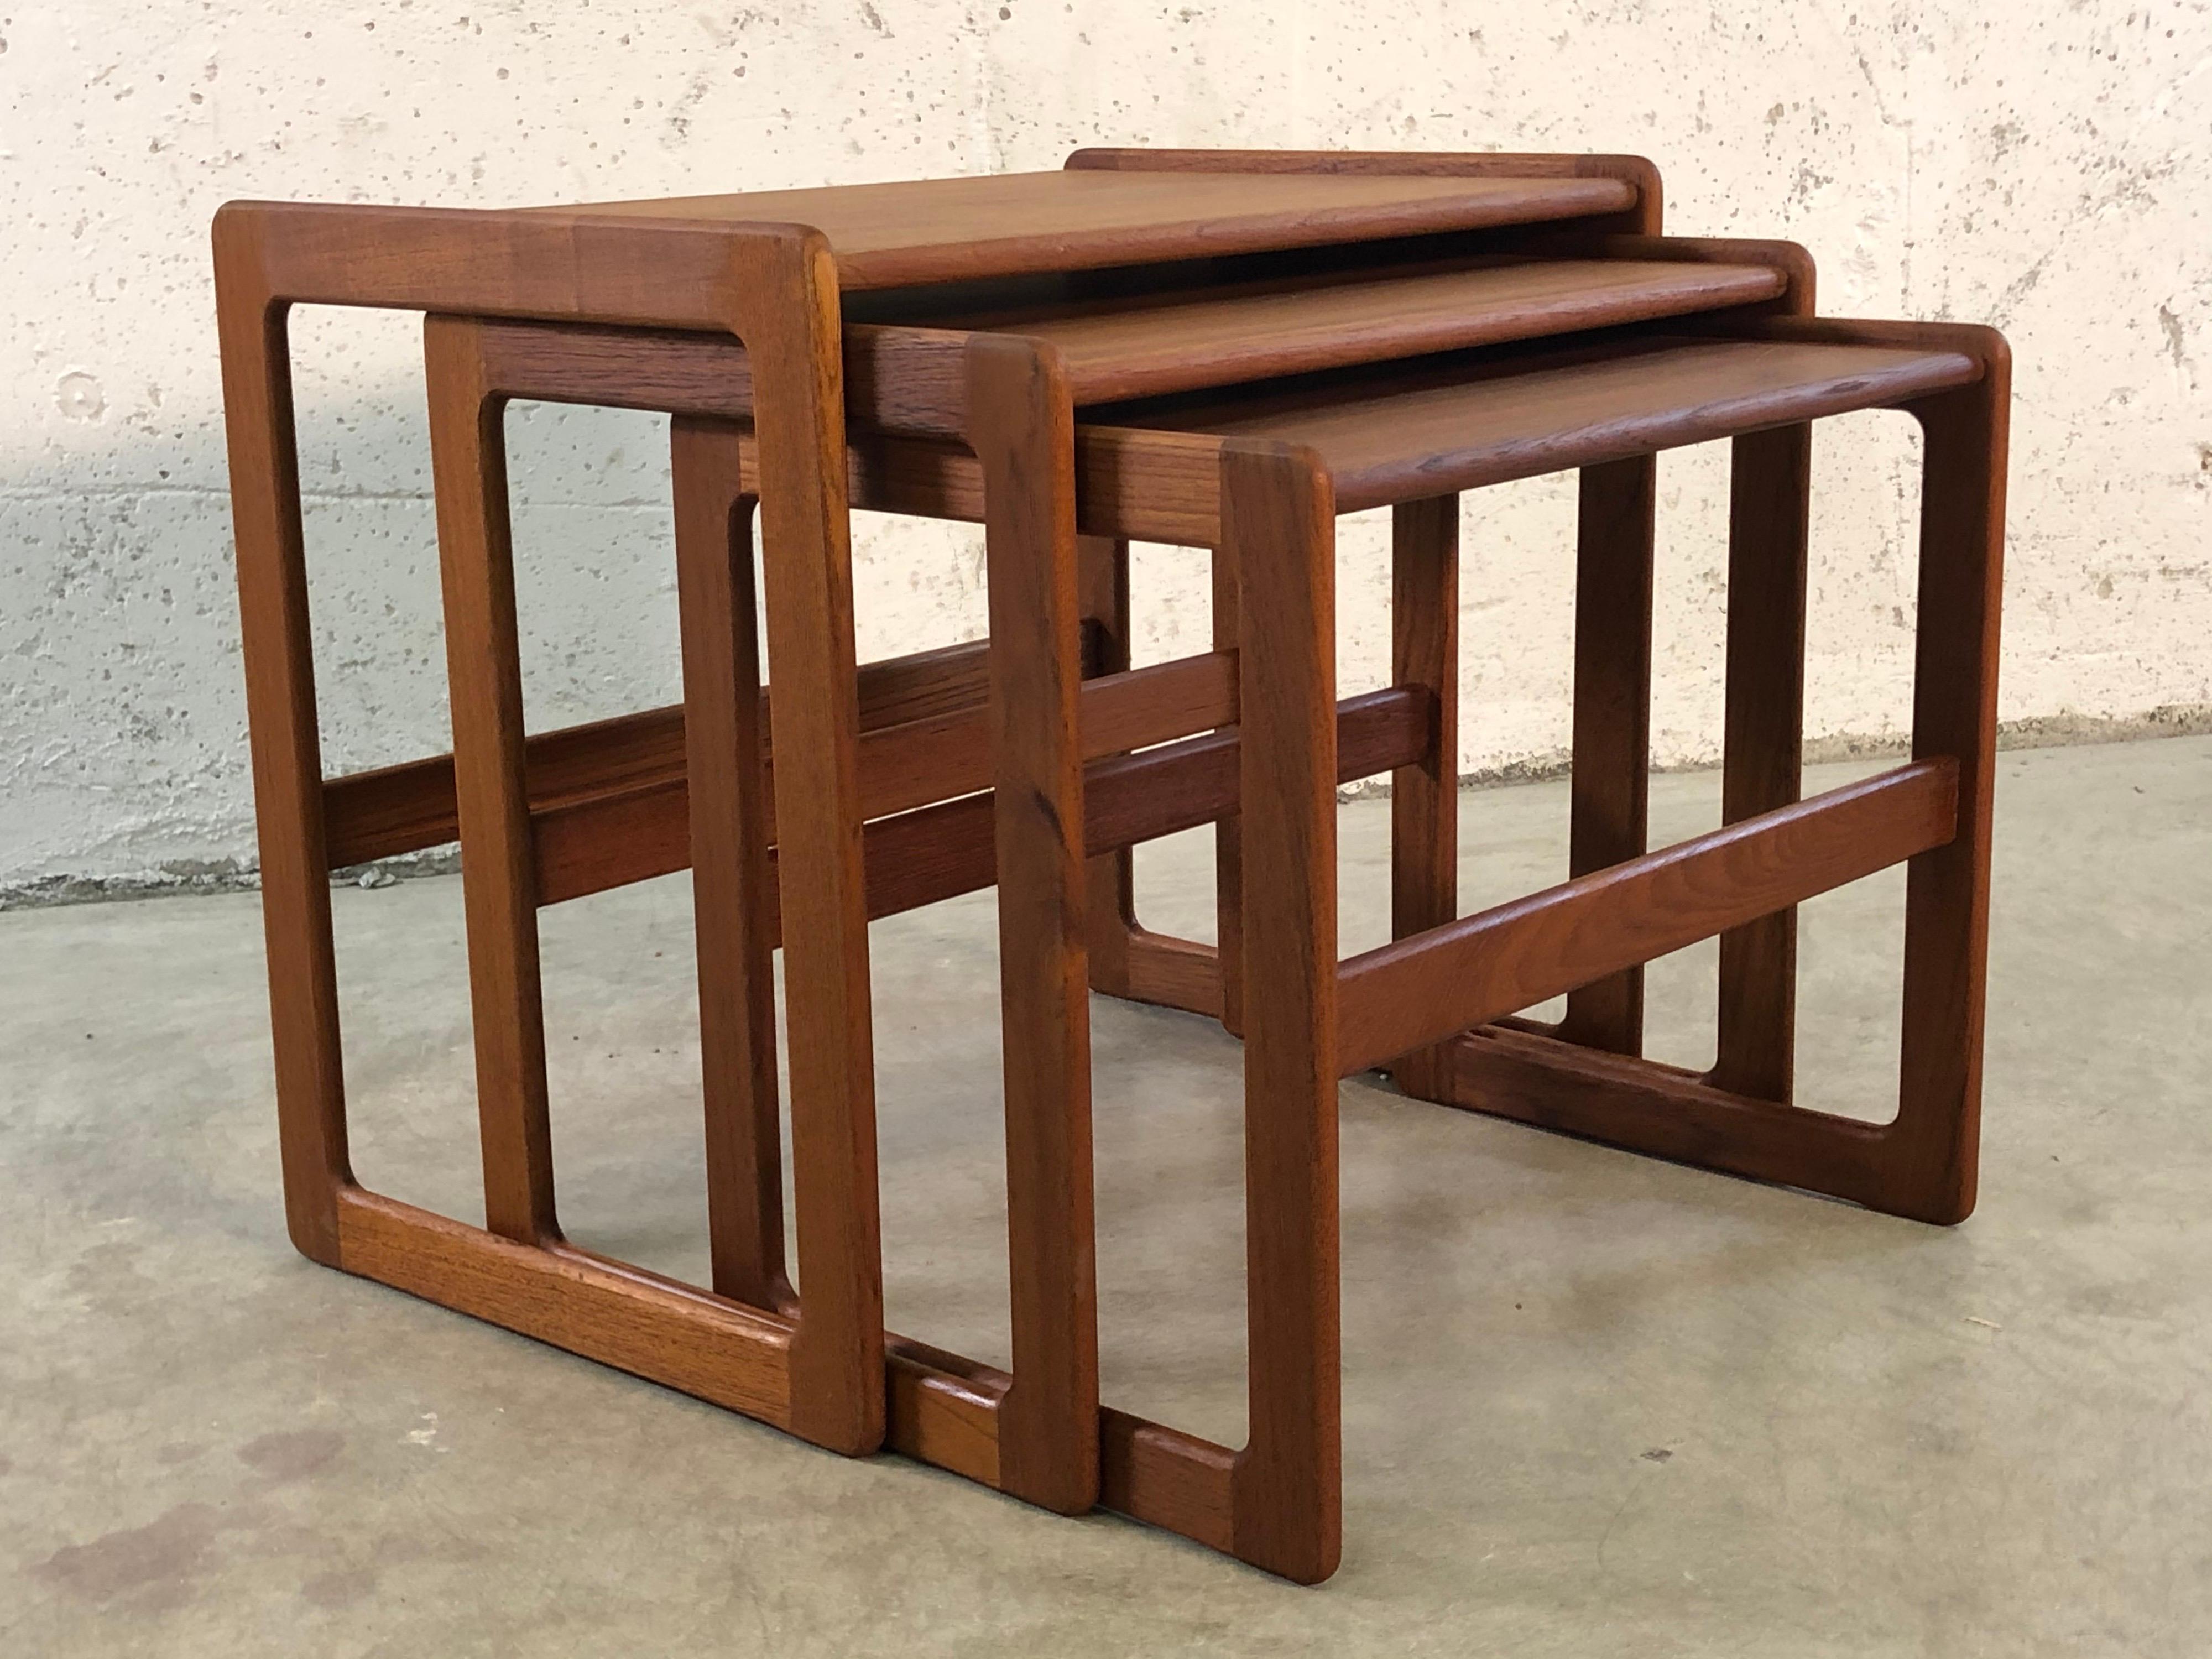 Vintage Danish teak set of 3 nesting tables. The tables have a nice clean line design but are not marked. The tables have all been refinished.